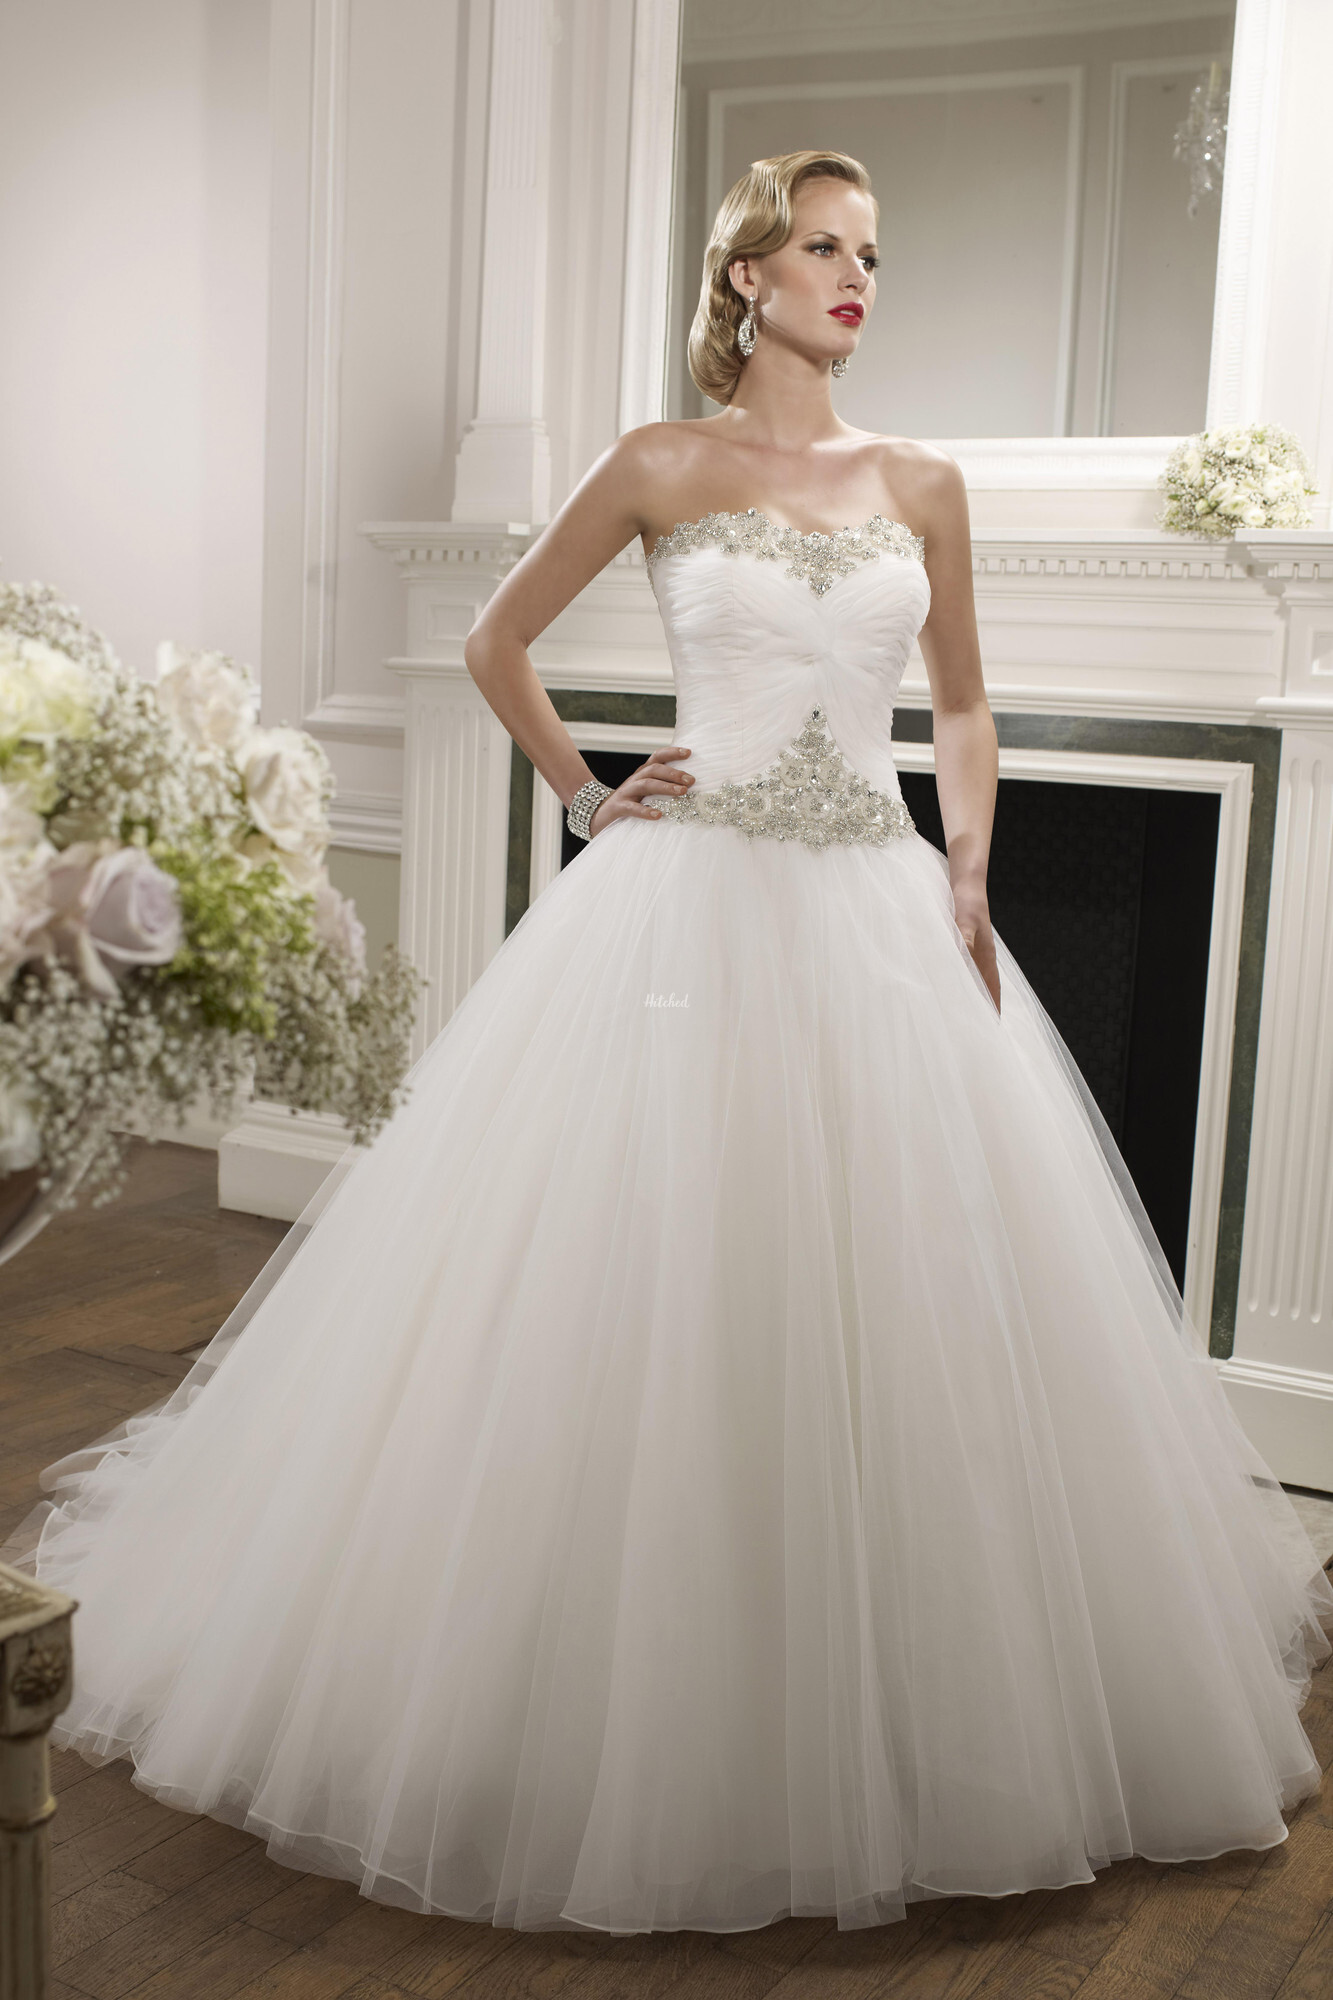 Satin Wedding Dresses & Bridal Gowns - Page 11 | hitched.co.uk